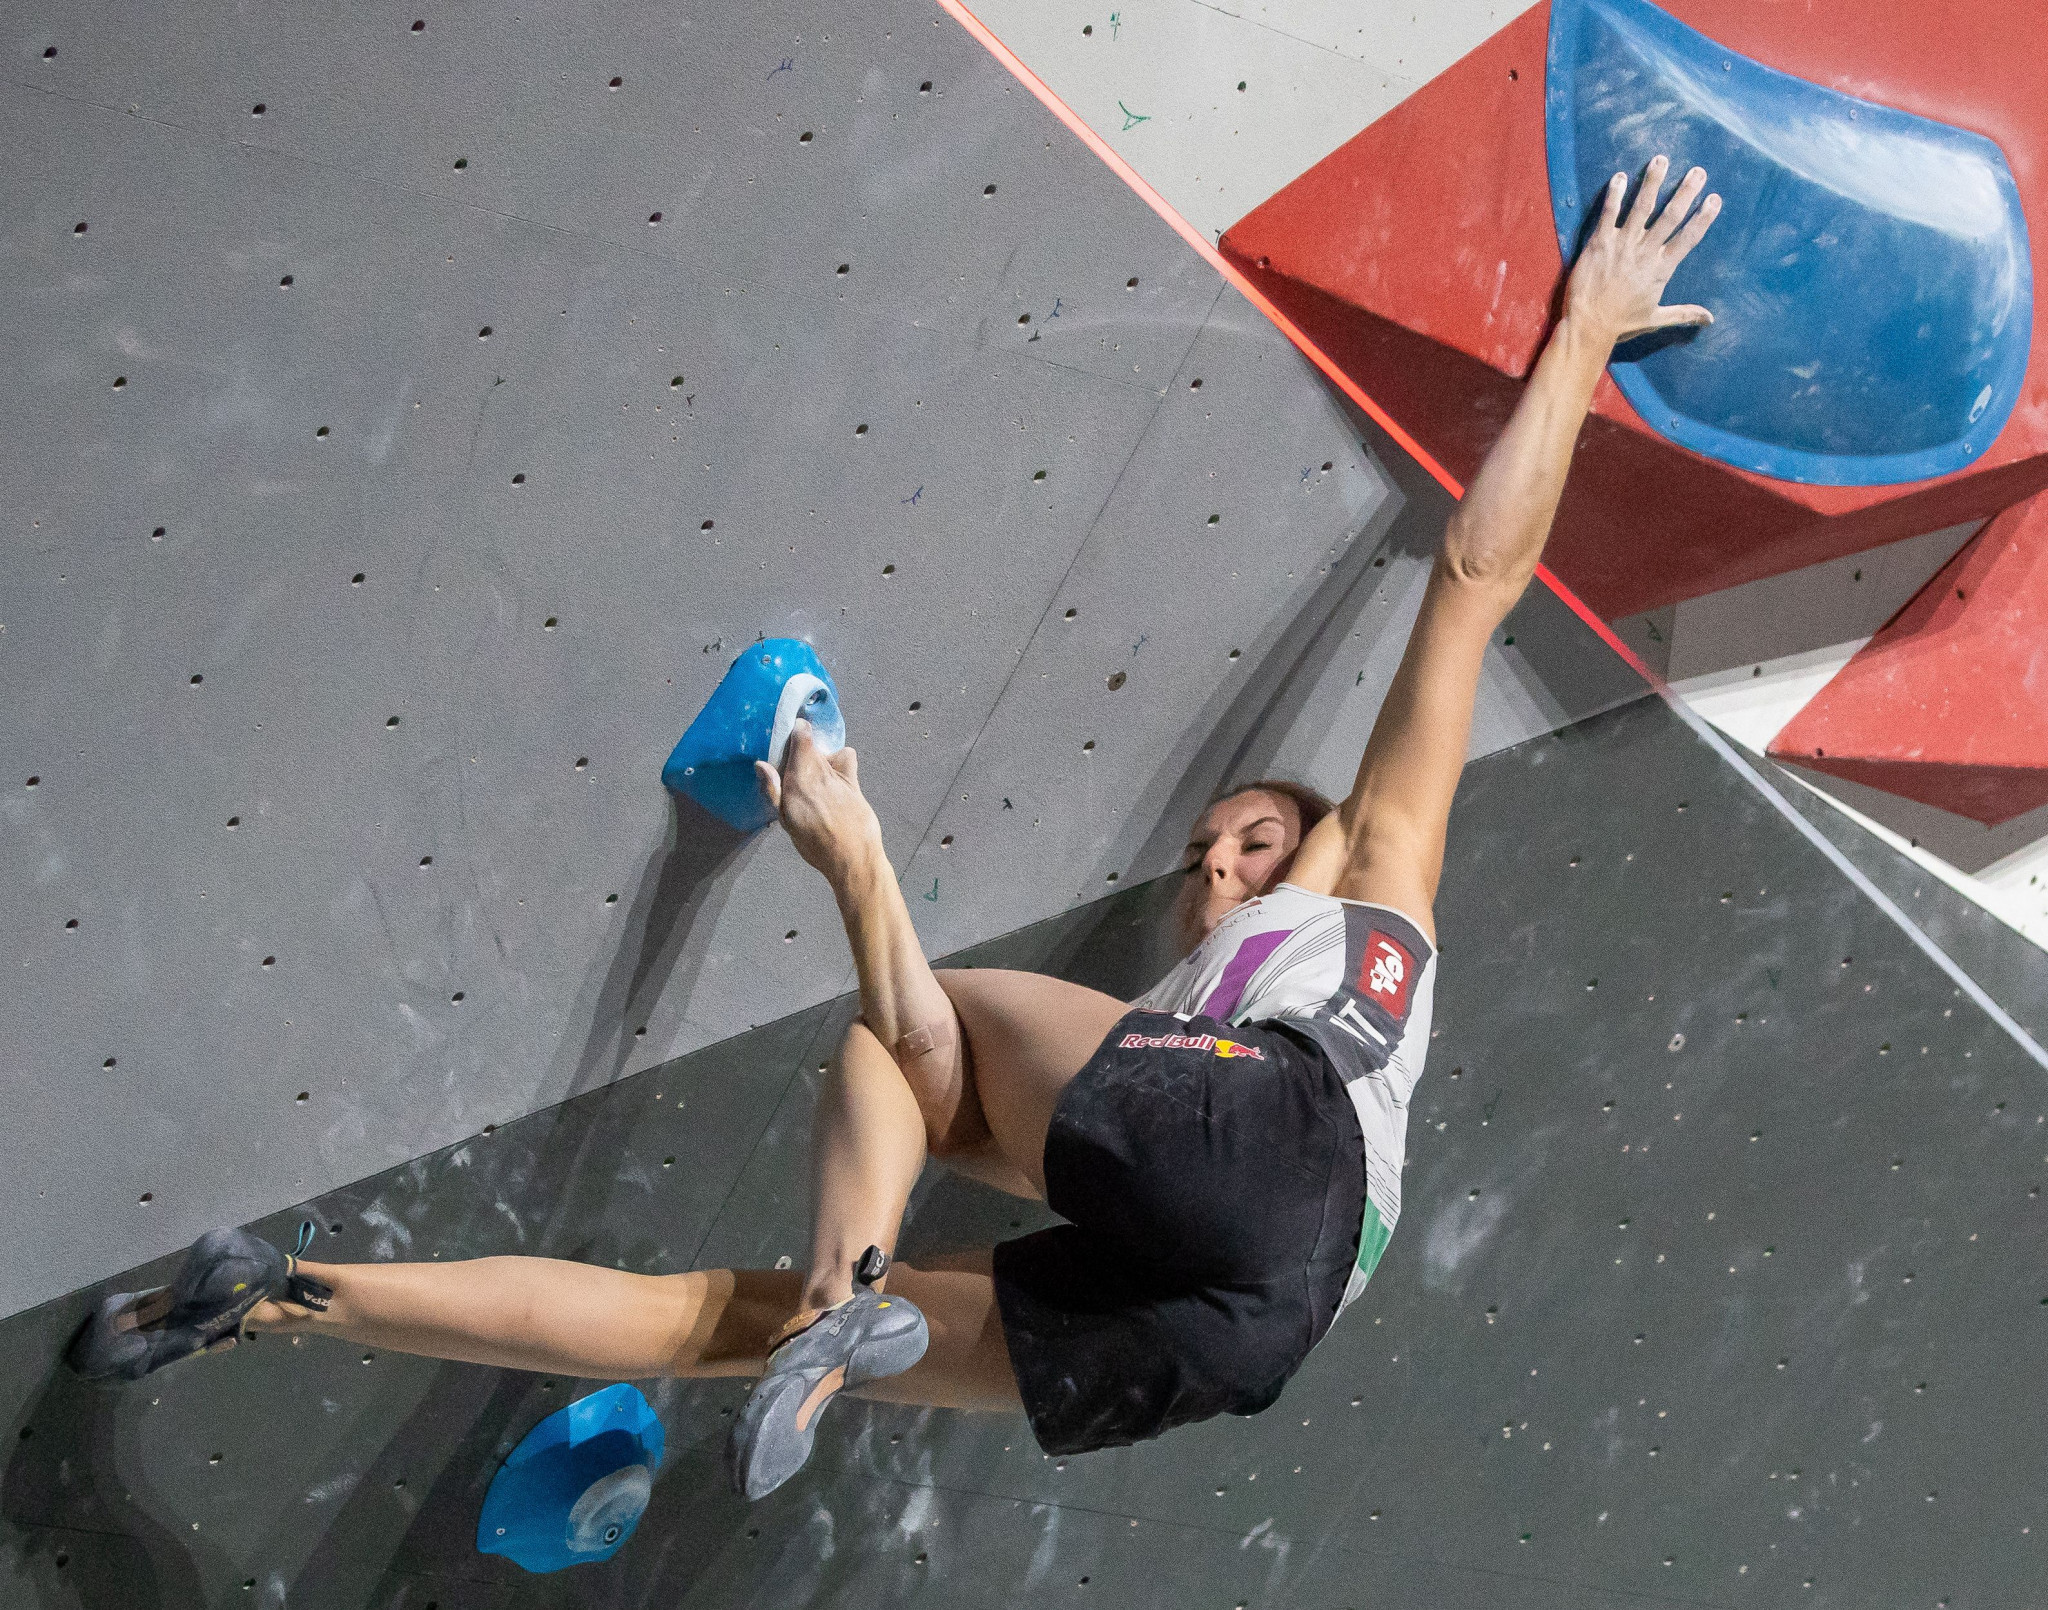 Jessica Pilz earned bouldering gold in Guangzhou ©Getty Images